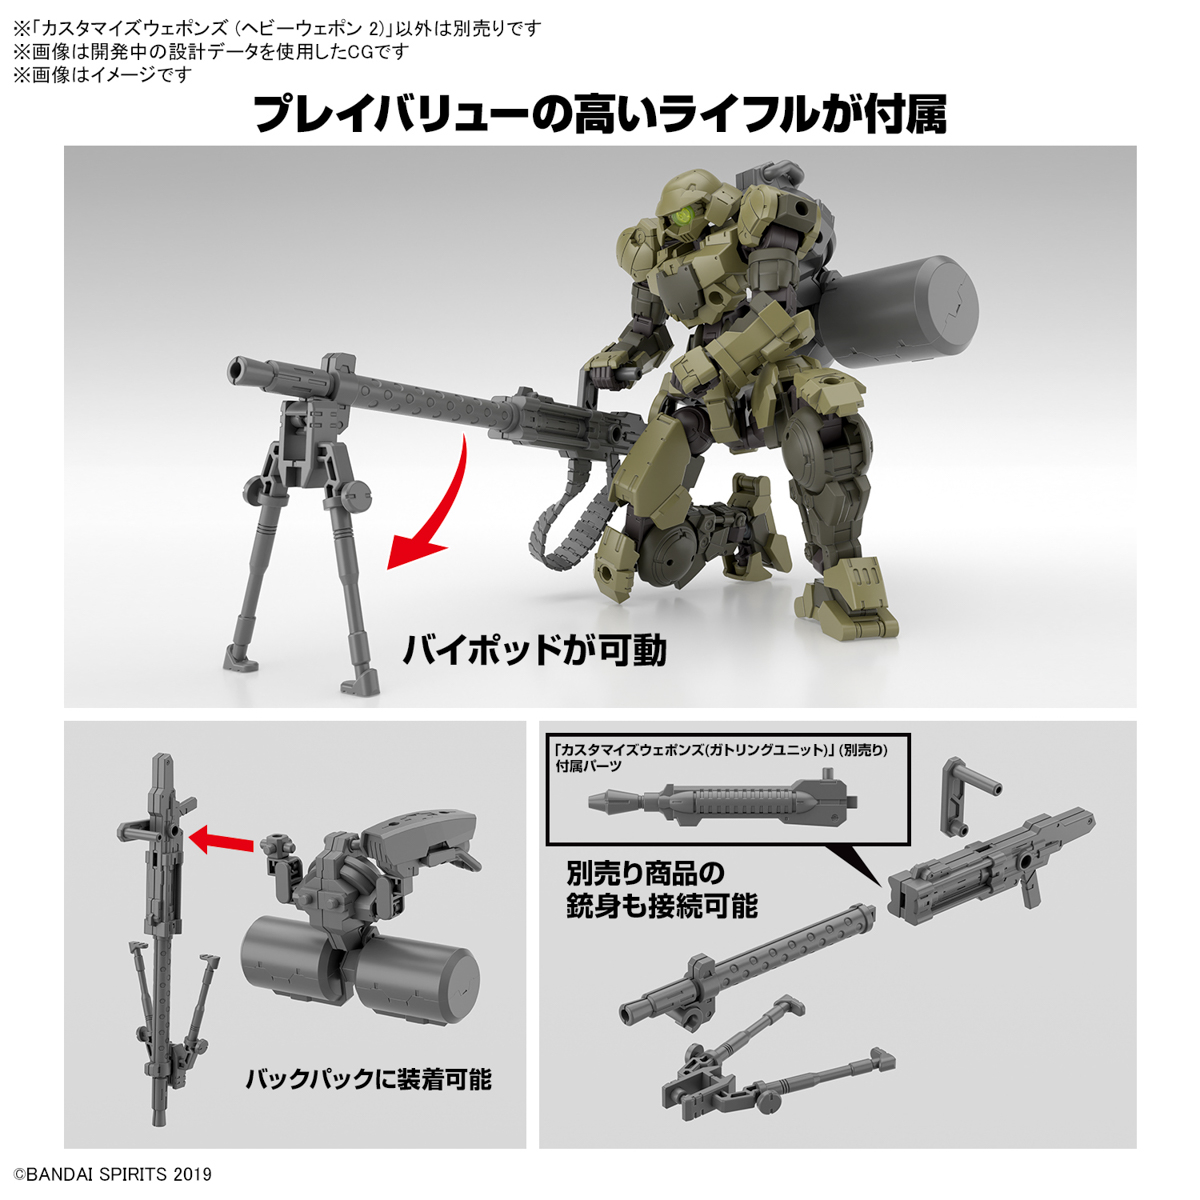 1/144 30MM Customized Weapons (Heavy Weapons 2) - 05